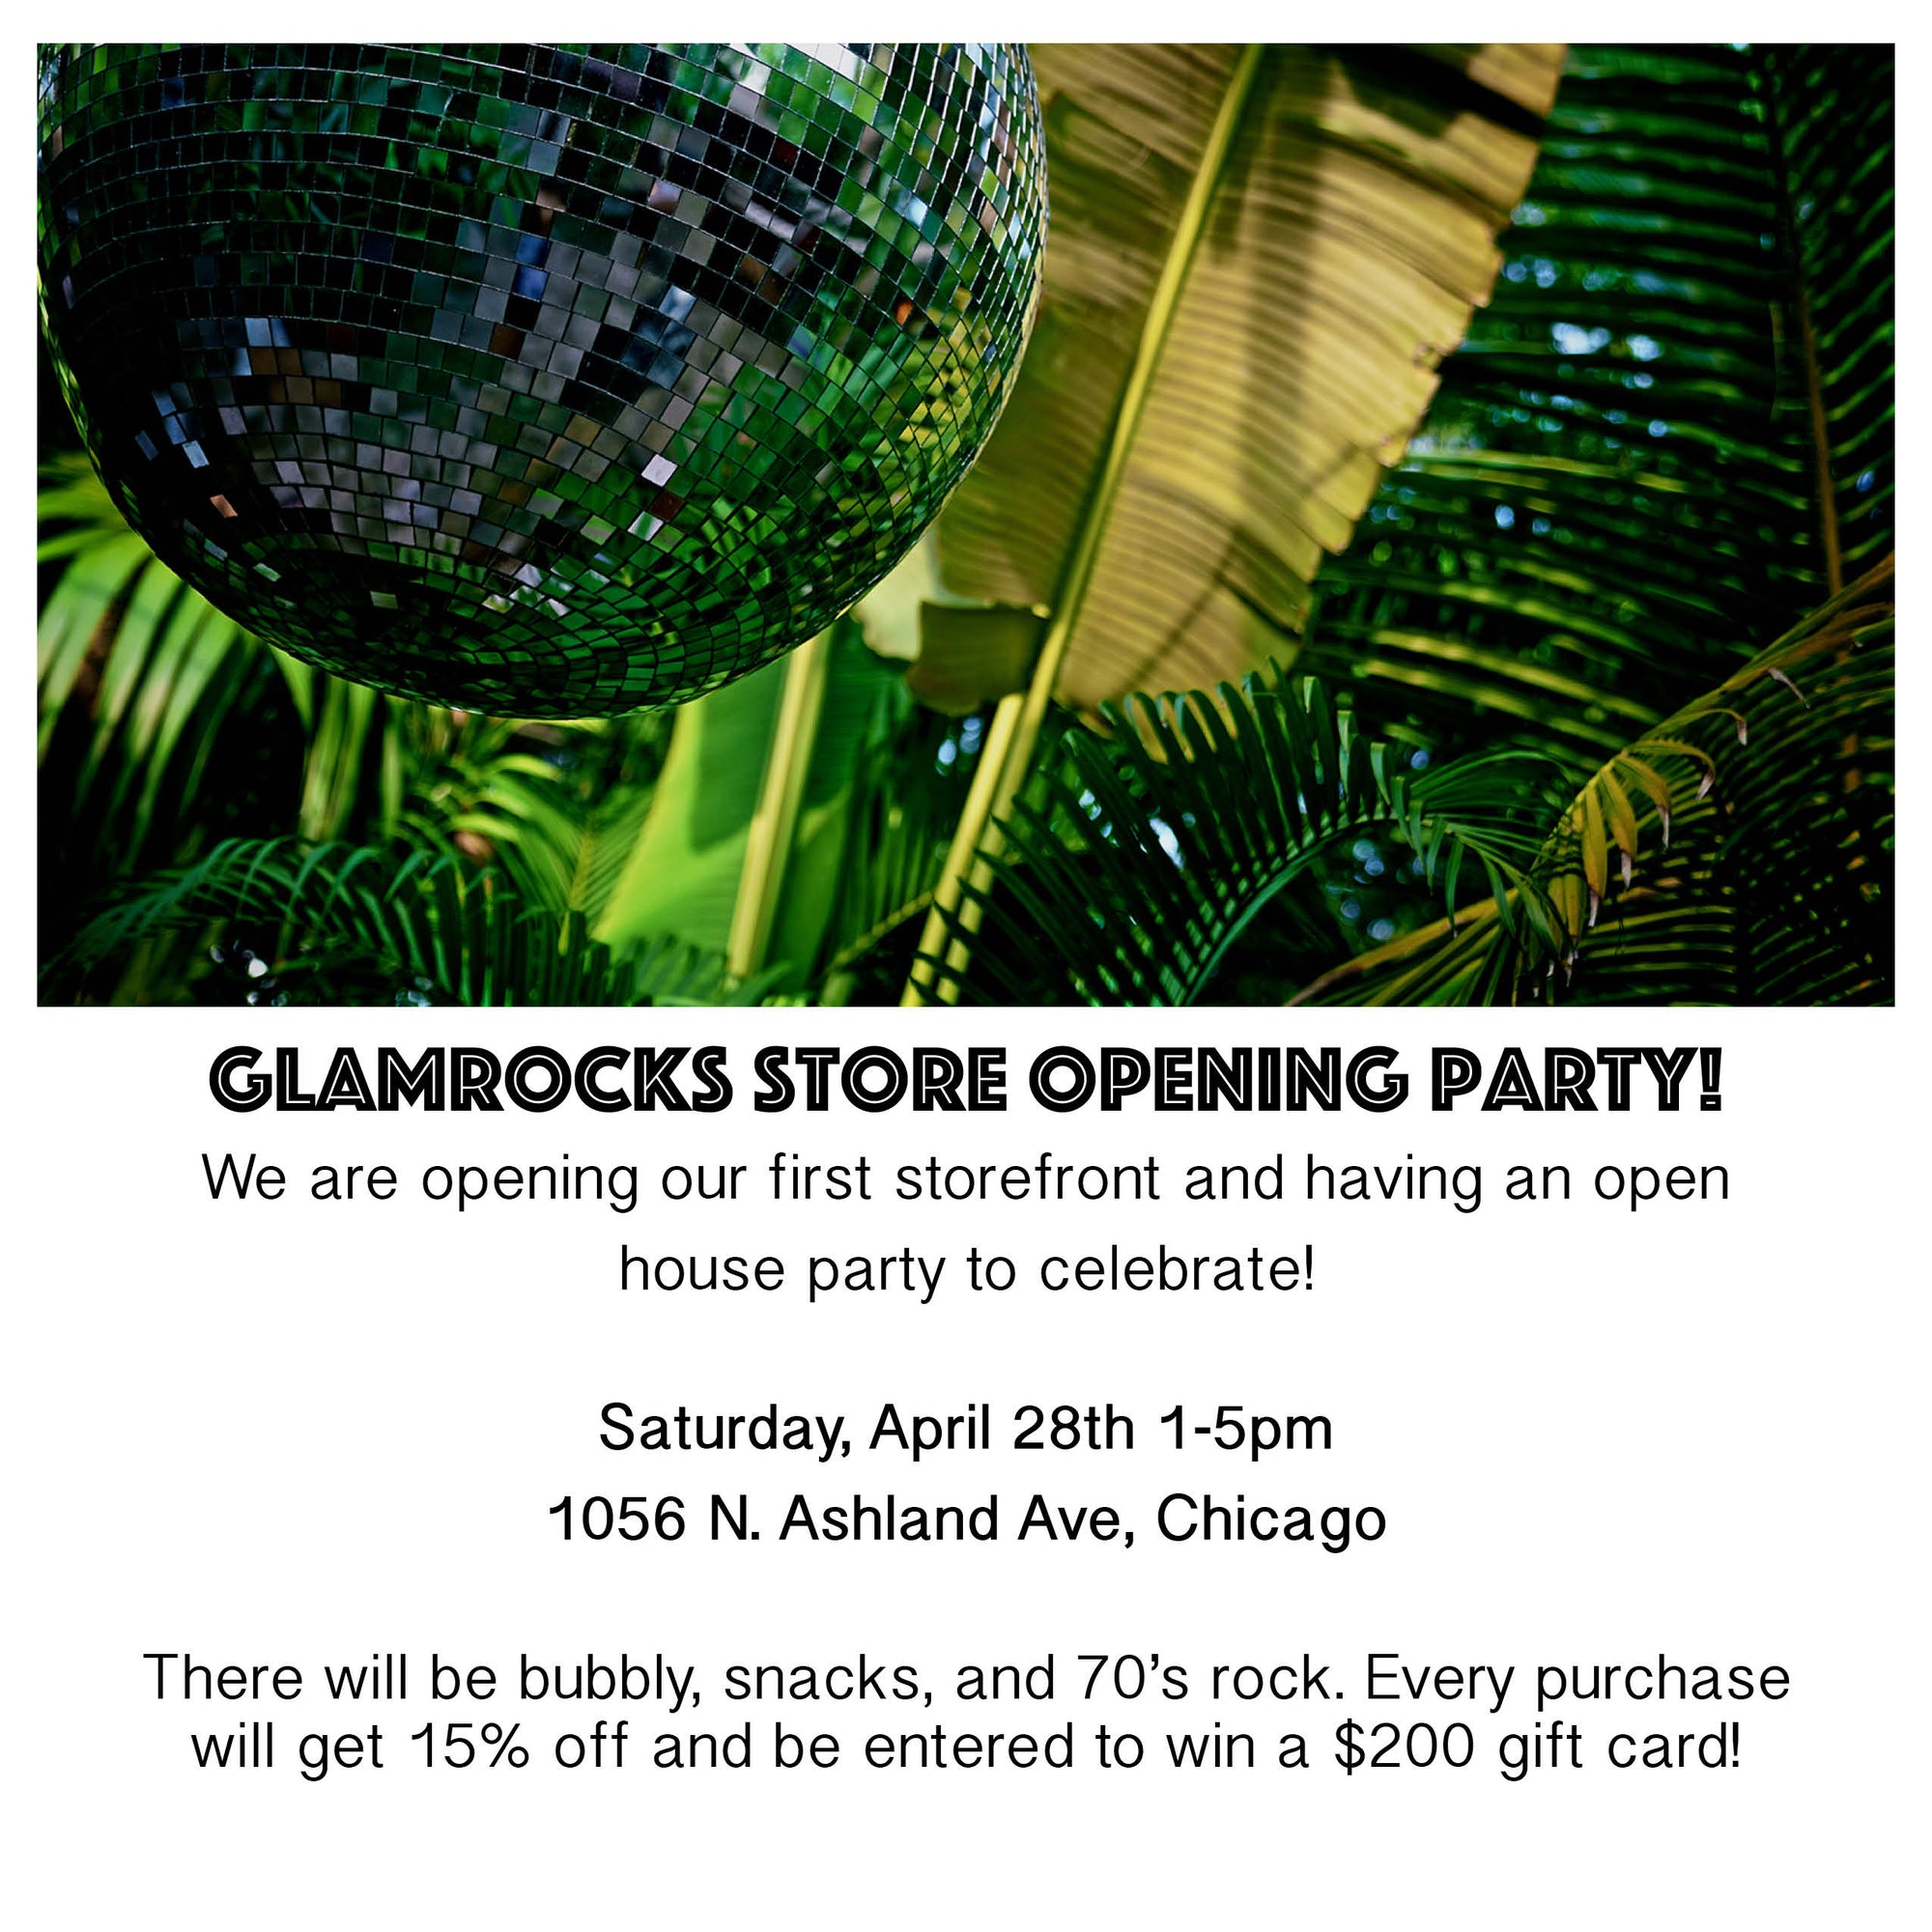 Glamrocks is Opening it's First Storefront!